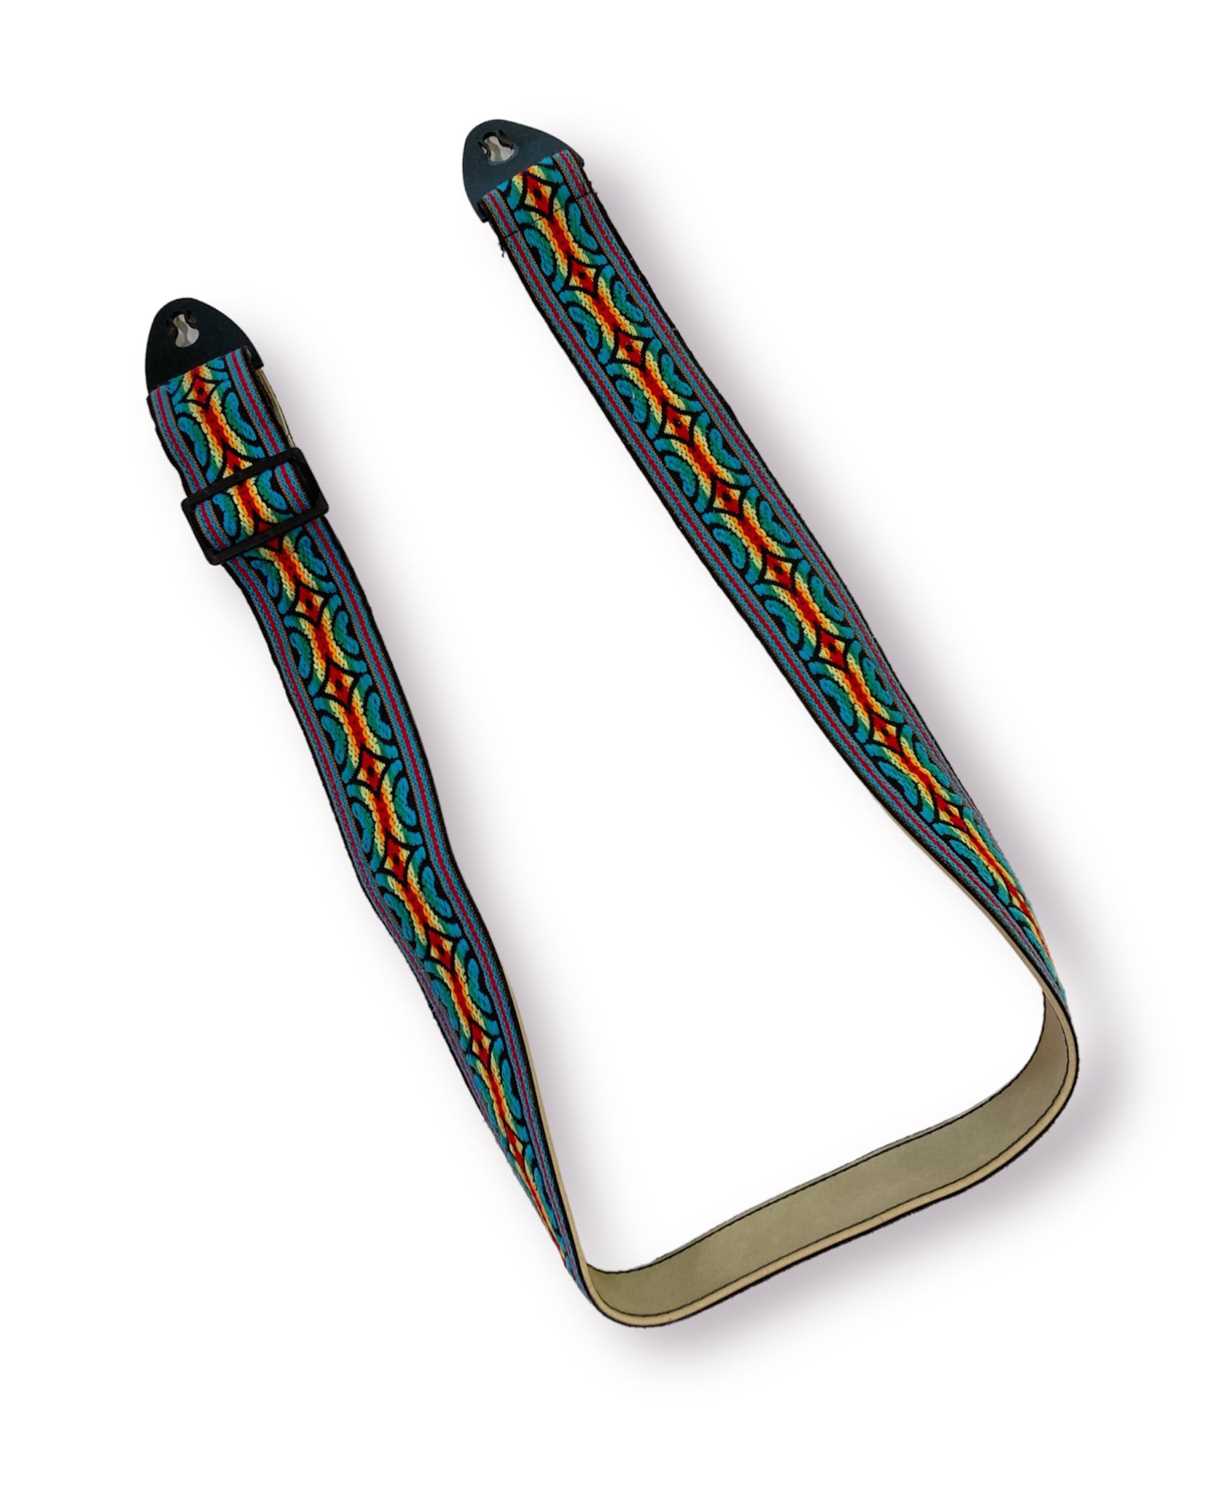 ERIC CLAPTON - OWNED AND USED GUITAR STRAP. - Image 2 of 4